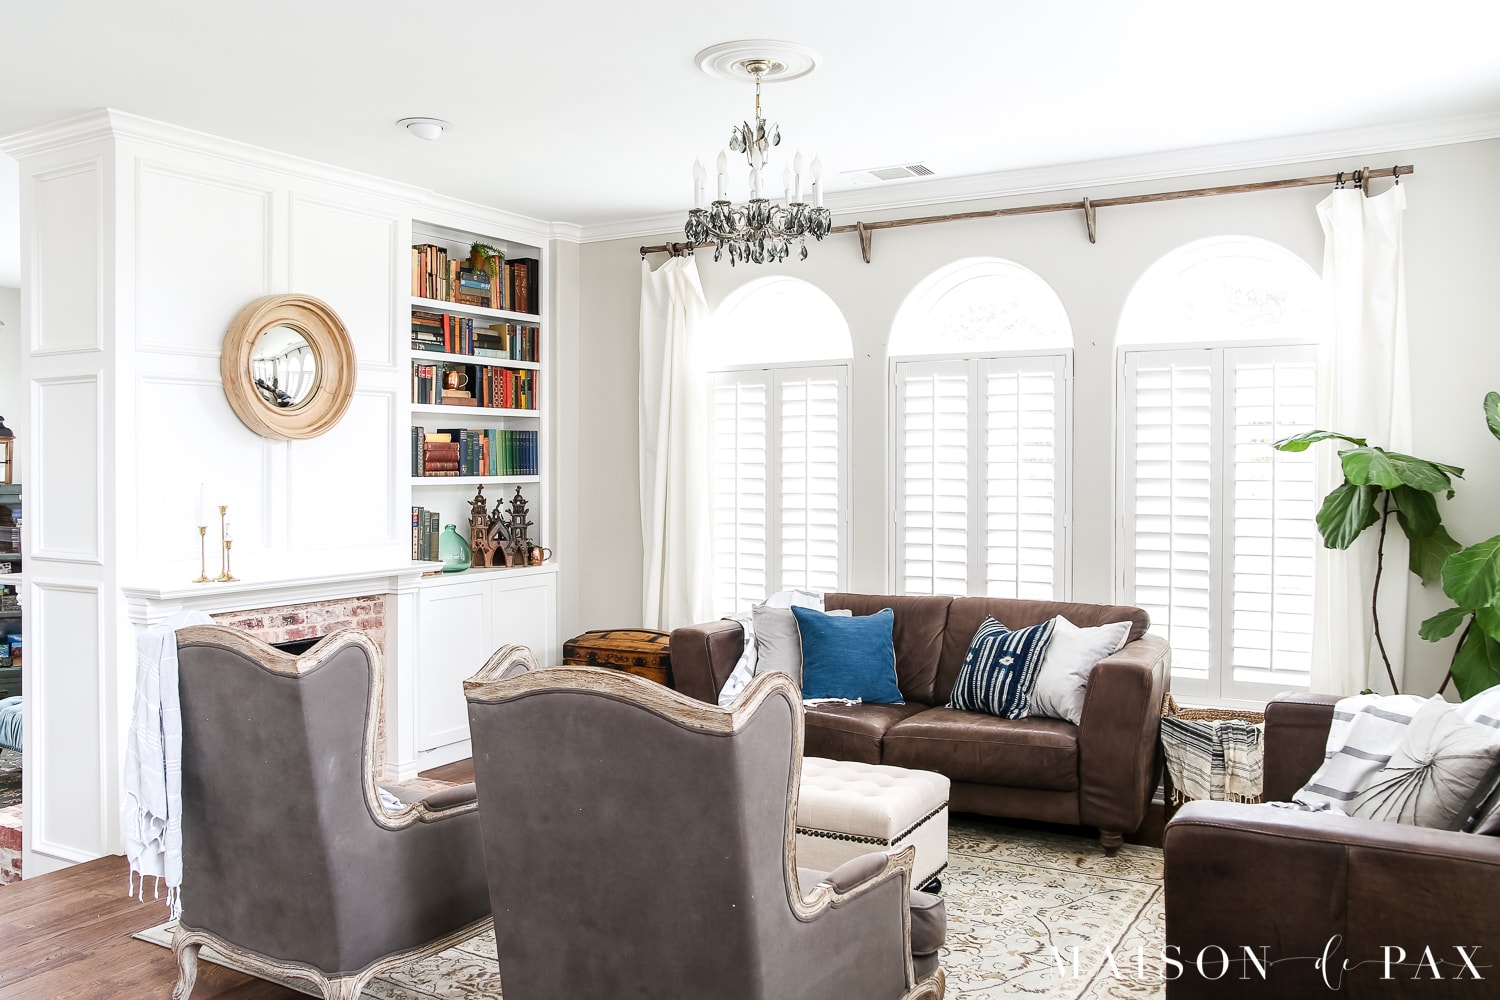 White and gray living room with pops of blue and green for spring. Wondering how to seasonally decorate your living spaces without going to too much trouble?  Get my best tips for transitioning from winter whites to neutrals, blues, and greens for a spring living room. #springdecor #springdecorating #springlivingroom #antiquebooks #howtodecorate #seasonaldecor #seasonaldecorating